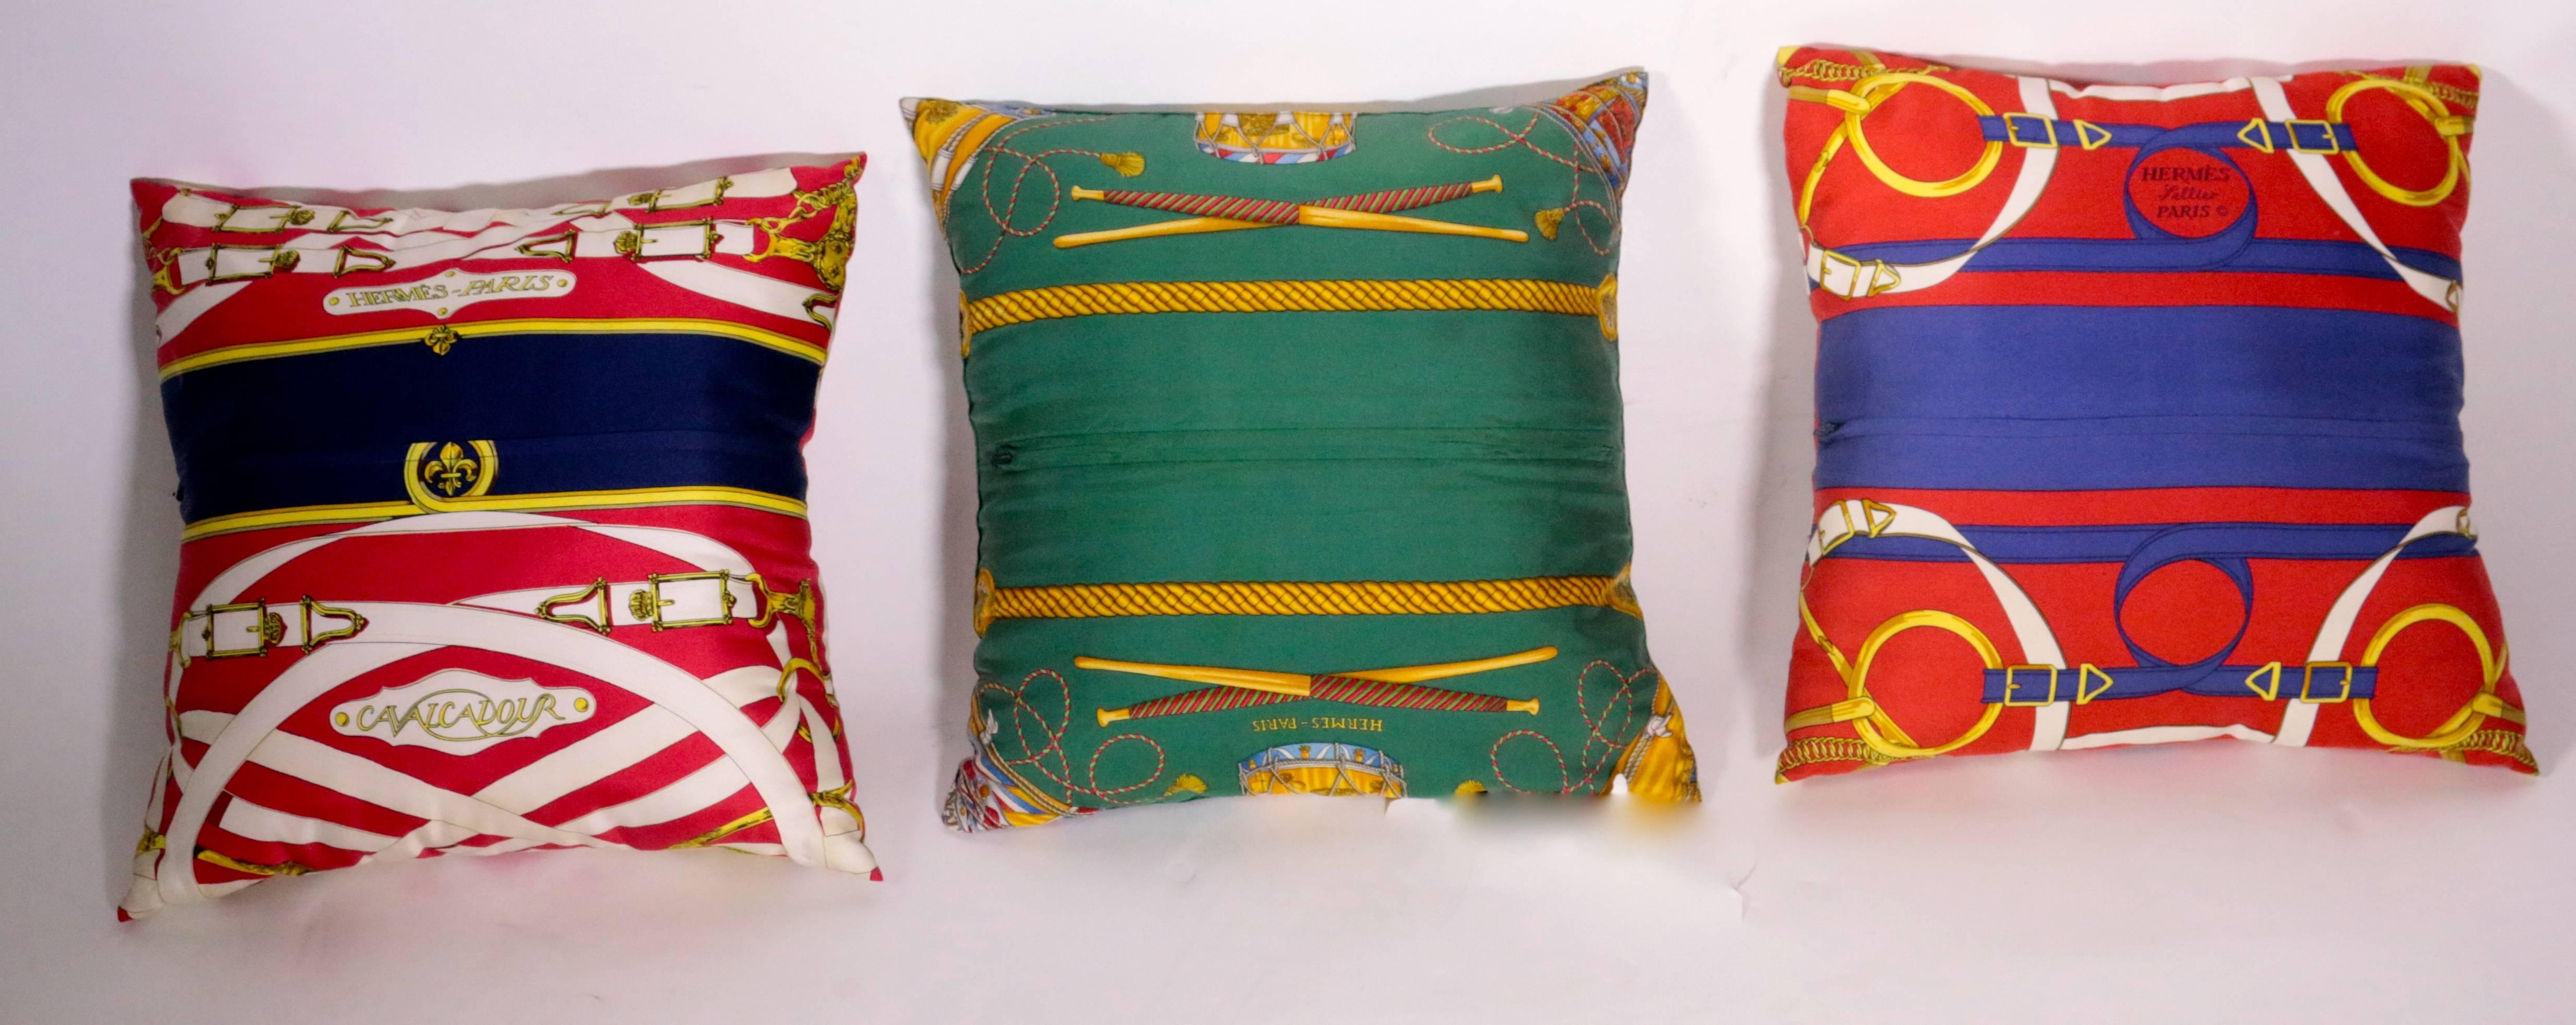 Set of three silk two sided Authentic Hermes pillows.
Zipper closure.